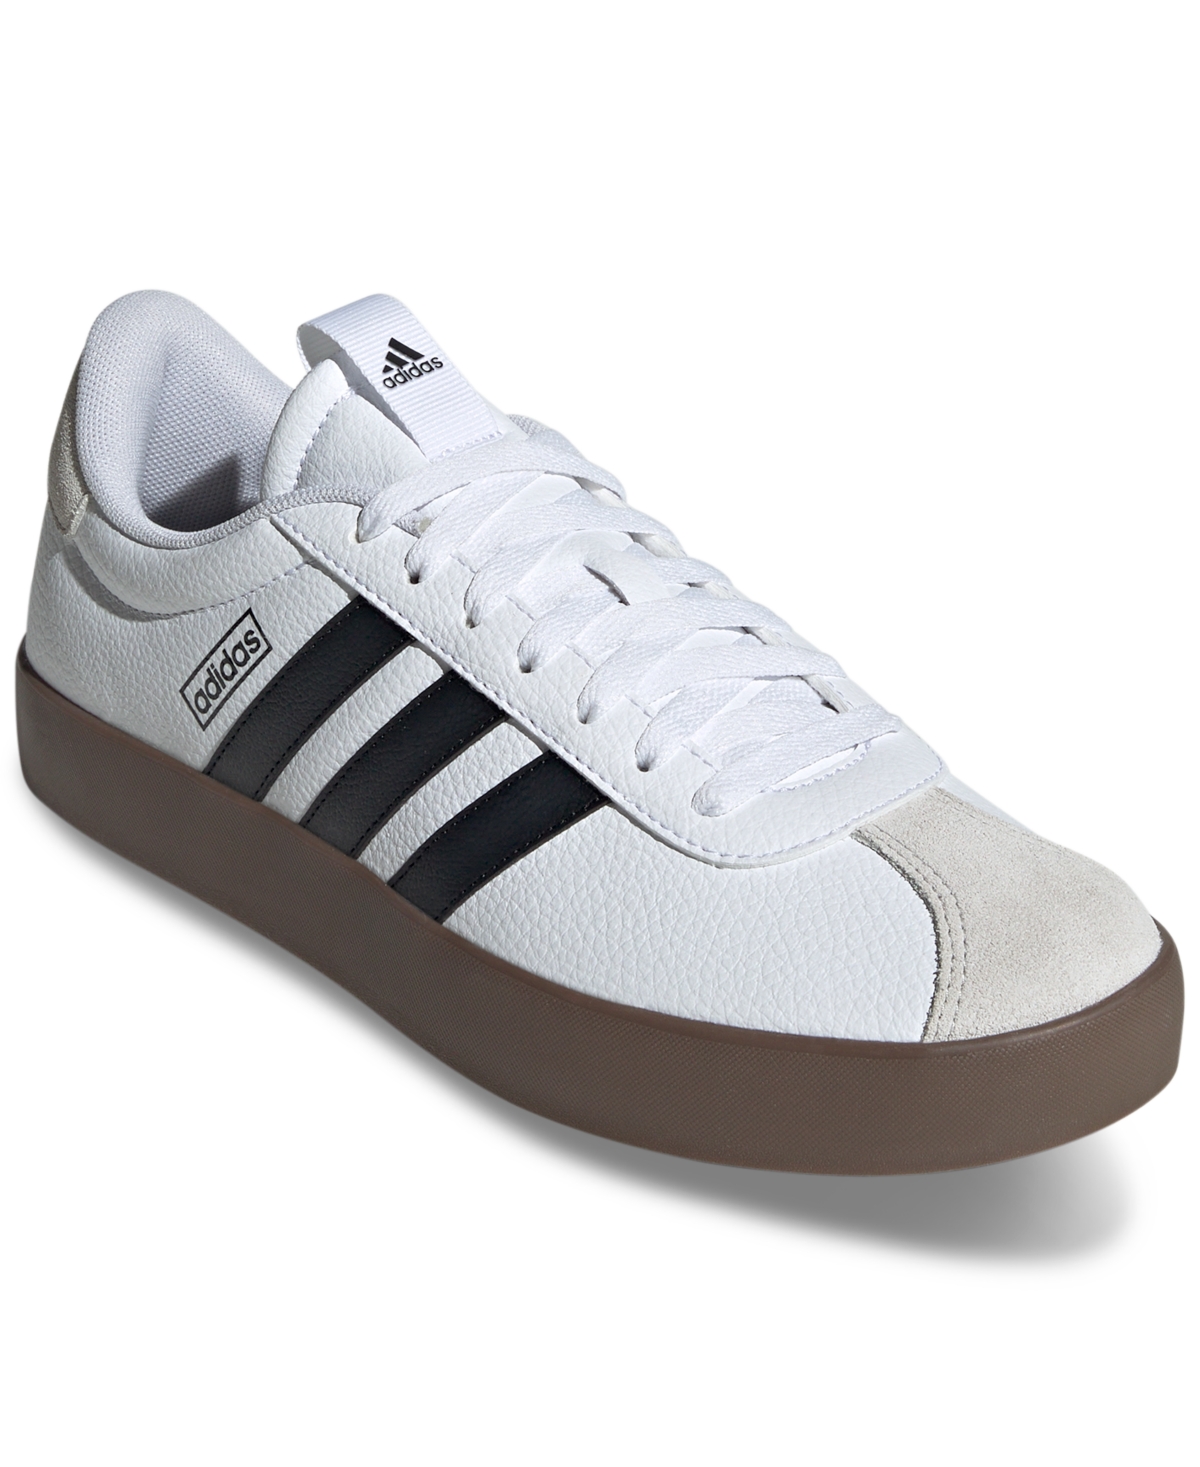 Shop Adidas Originals Men's Vl Court 3.0 Casual Sneakers From Finish Line In White,black,gray